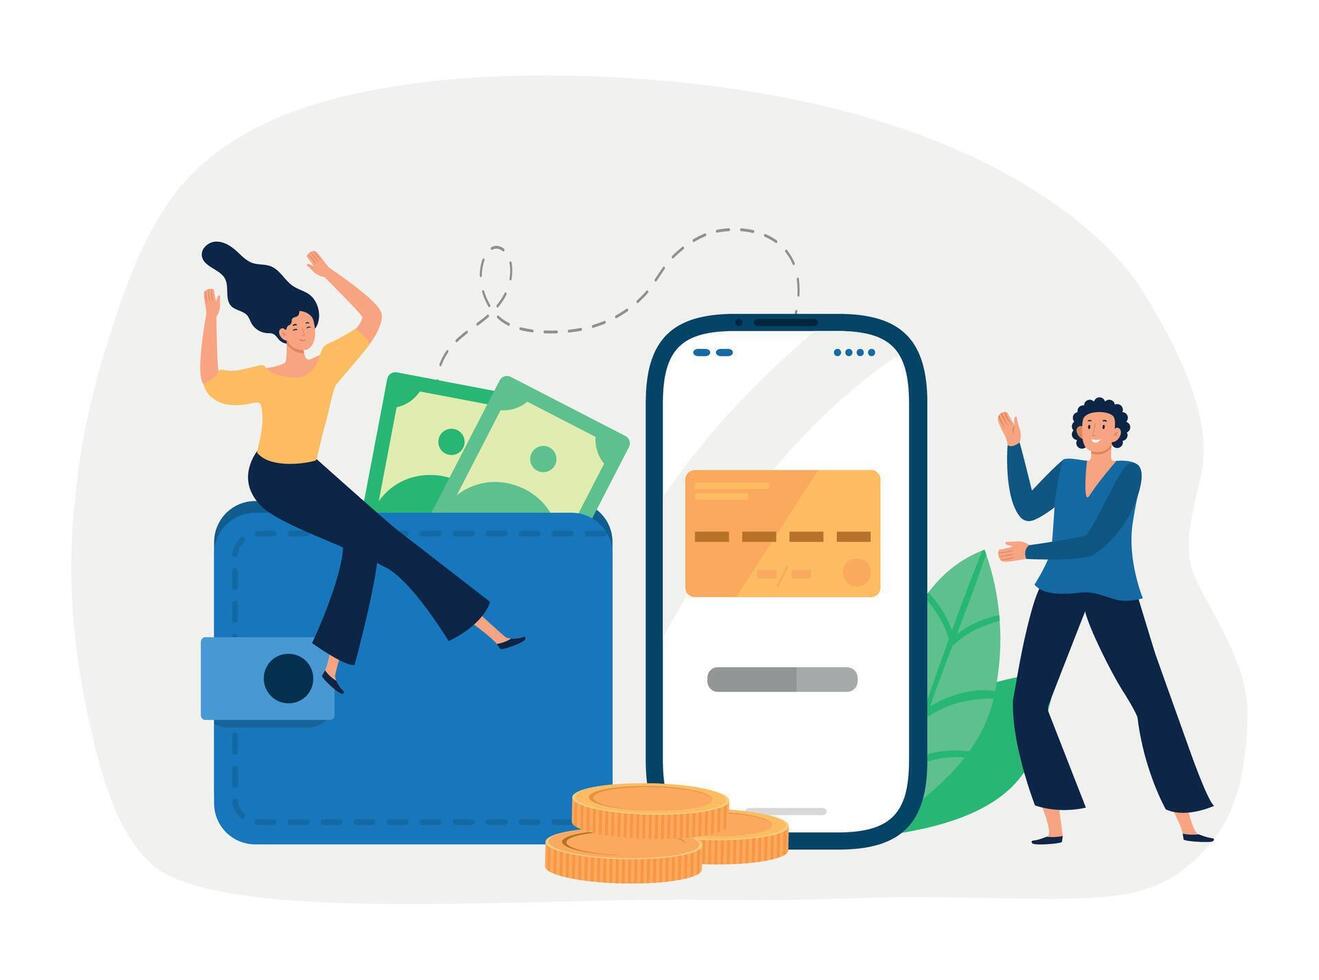 Online payment. Cartoon little woman sitting on wallet with banknotes. Transferring cash into credit card on smartphone vector